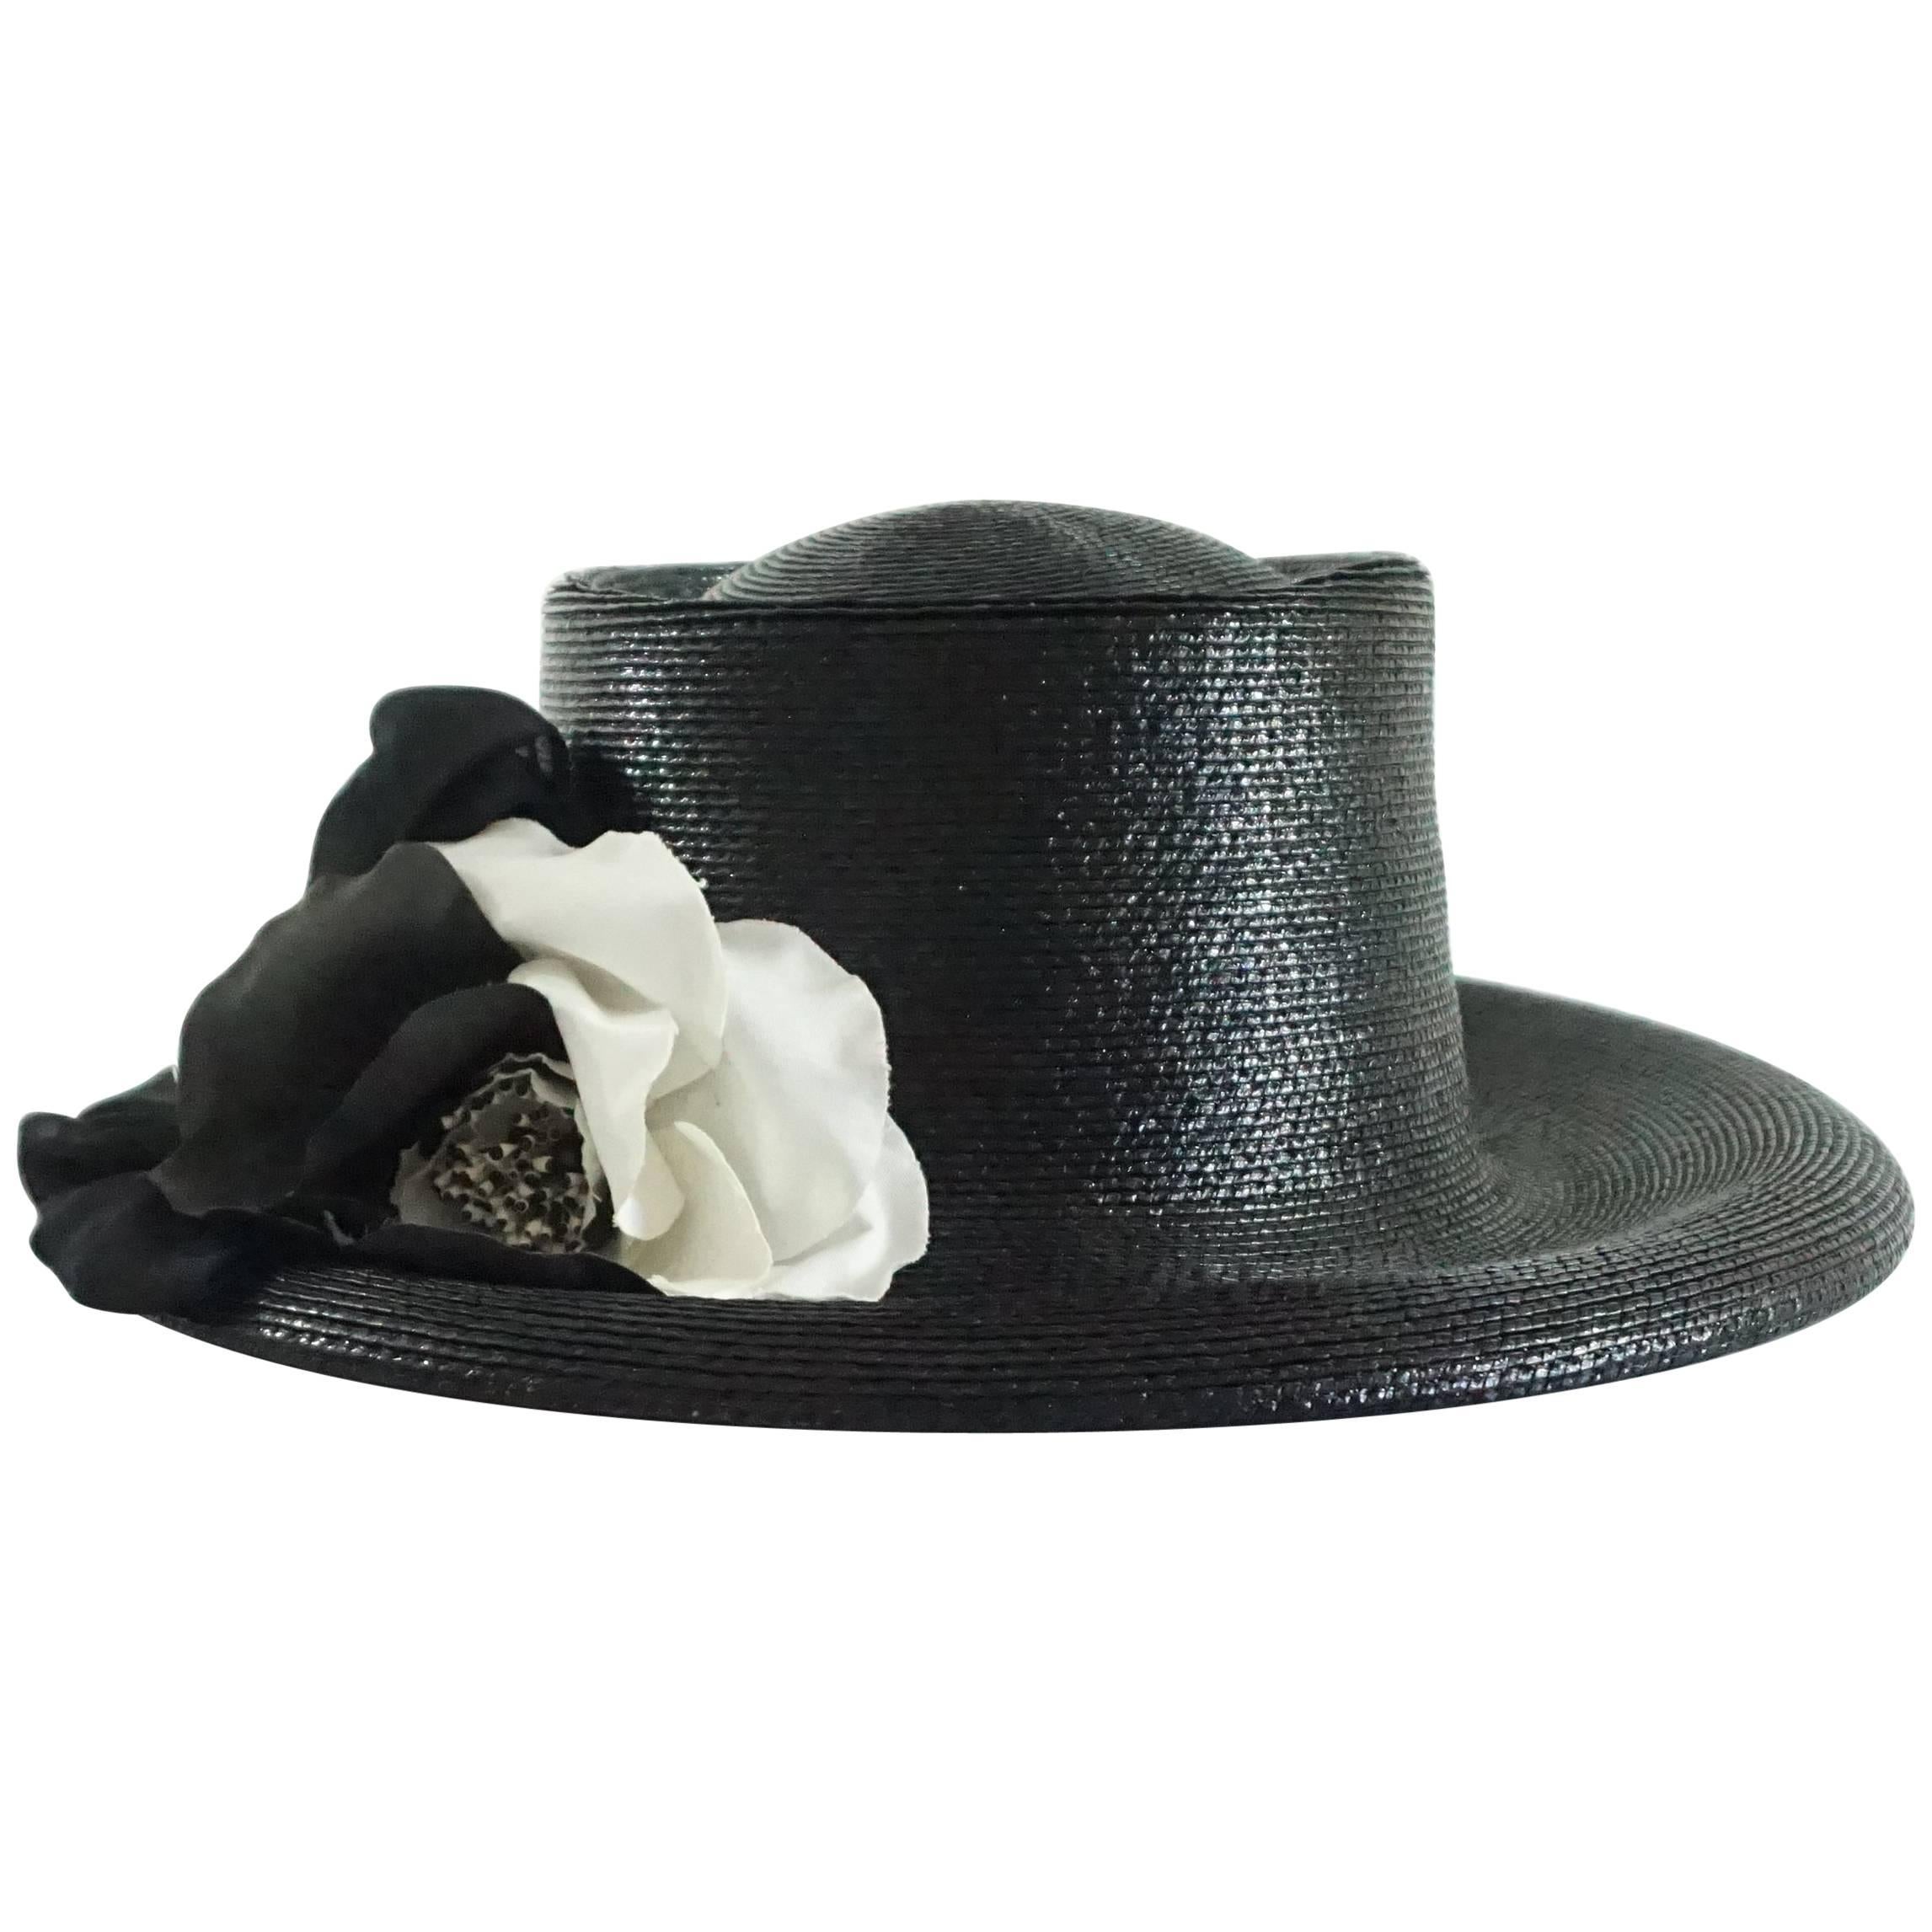 Suzanne Couture Millinery Black Gloss Straw Hat with Silk Flower